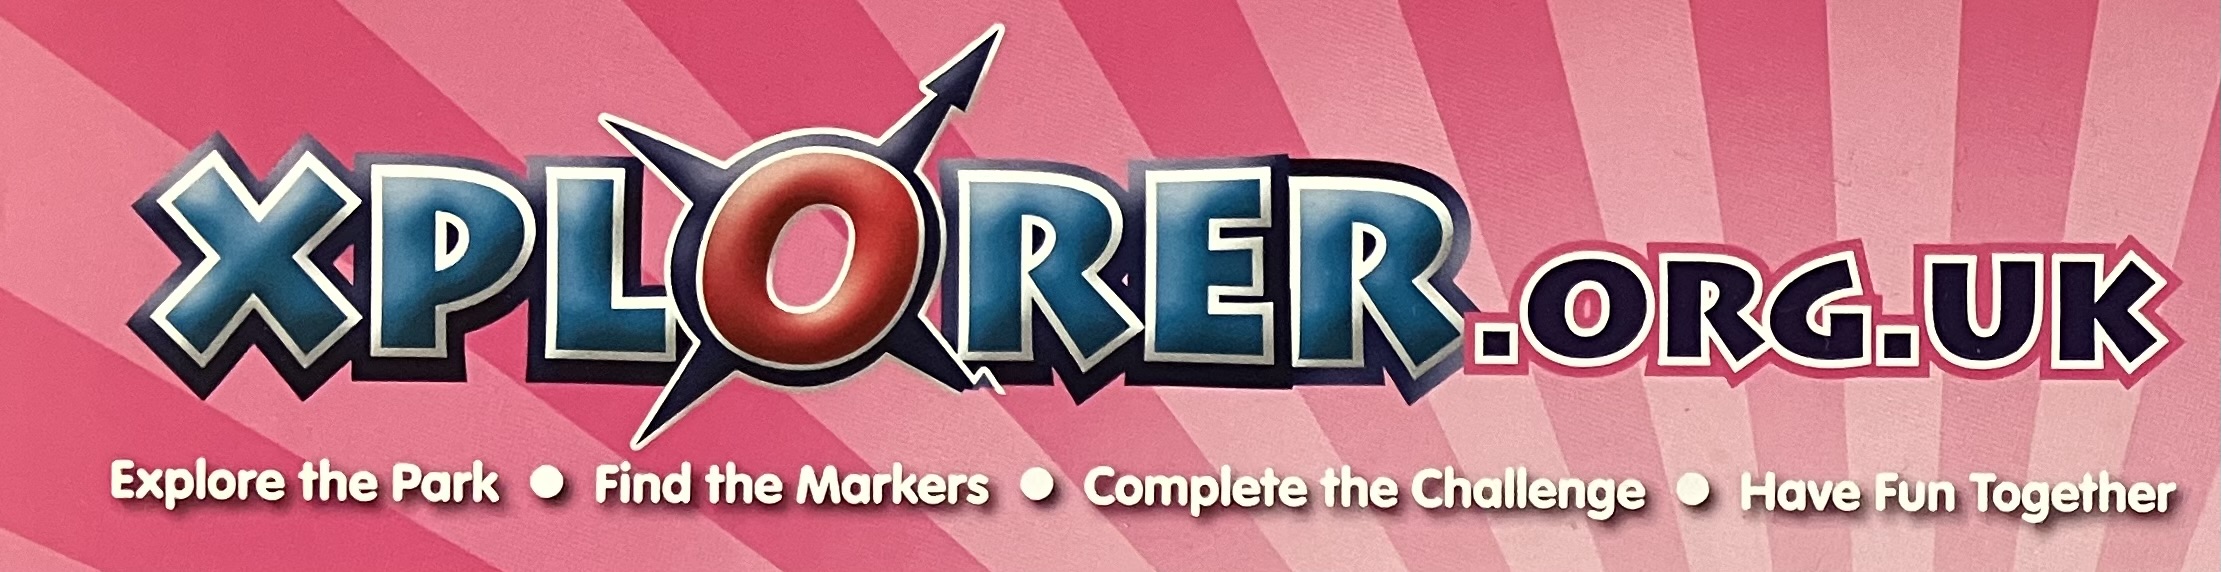 Xplorer find the park, find the markers, complete the challenge and have fun together